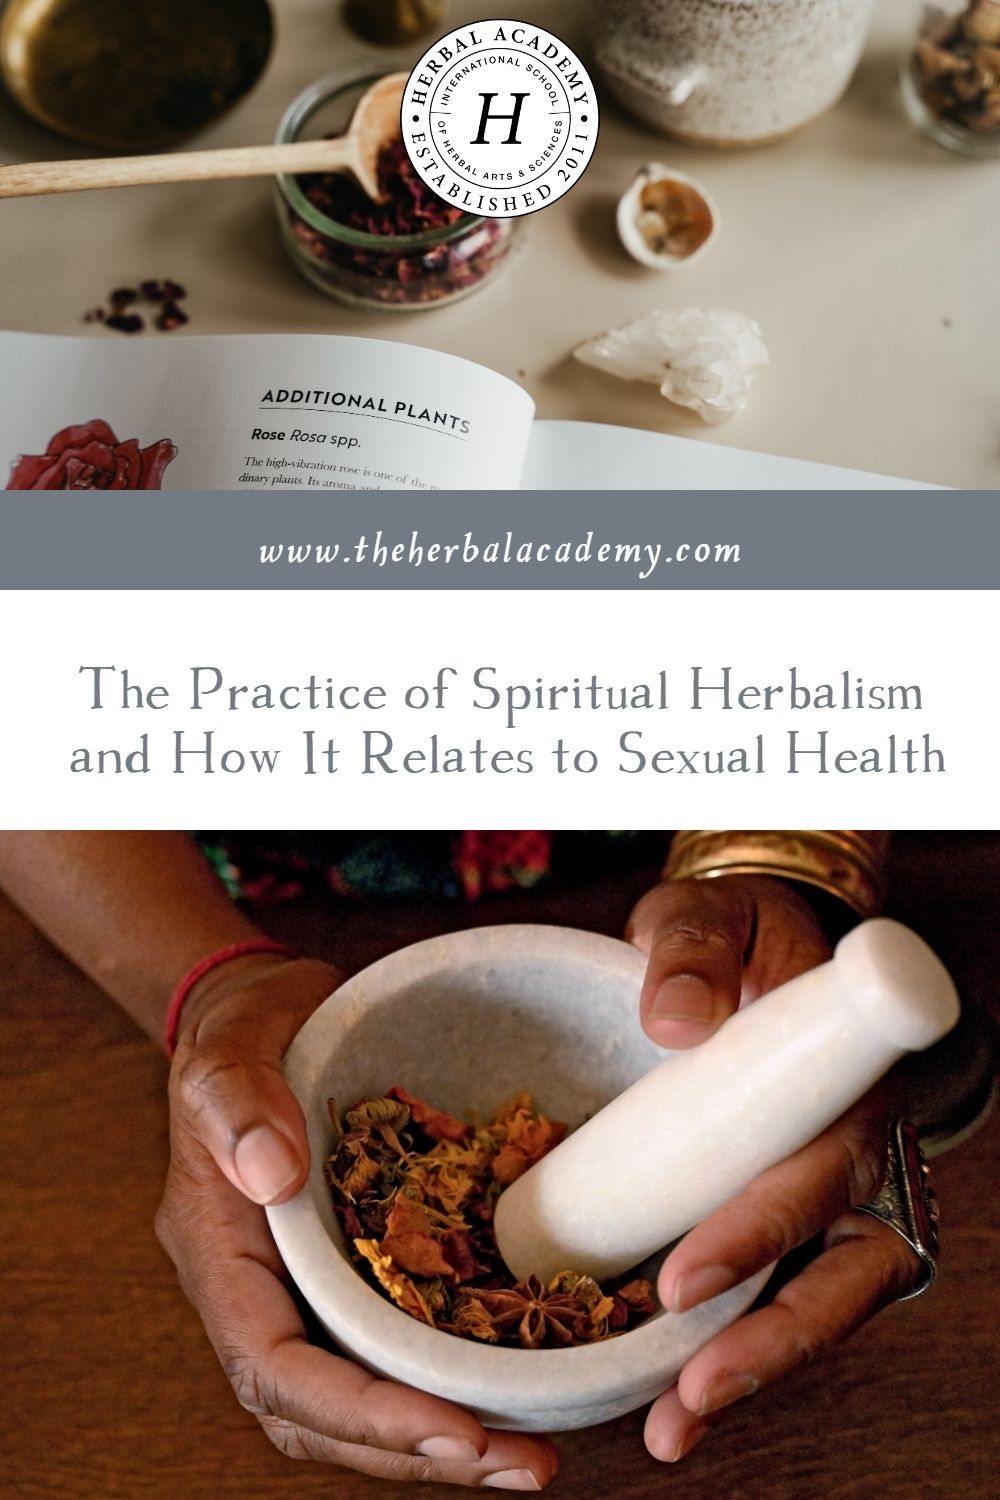 The Practice of Spiritual Herbalism and How It Relates to Sexual Health | Herbal Academy | This book excerpt introduces the intersection of spiritual herbalism and sexual health, tying it together with poignant spiritual insights.